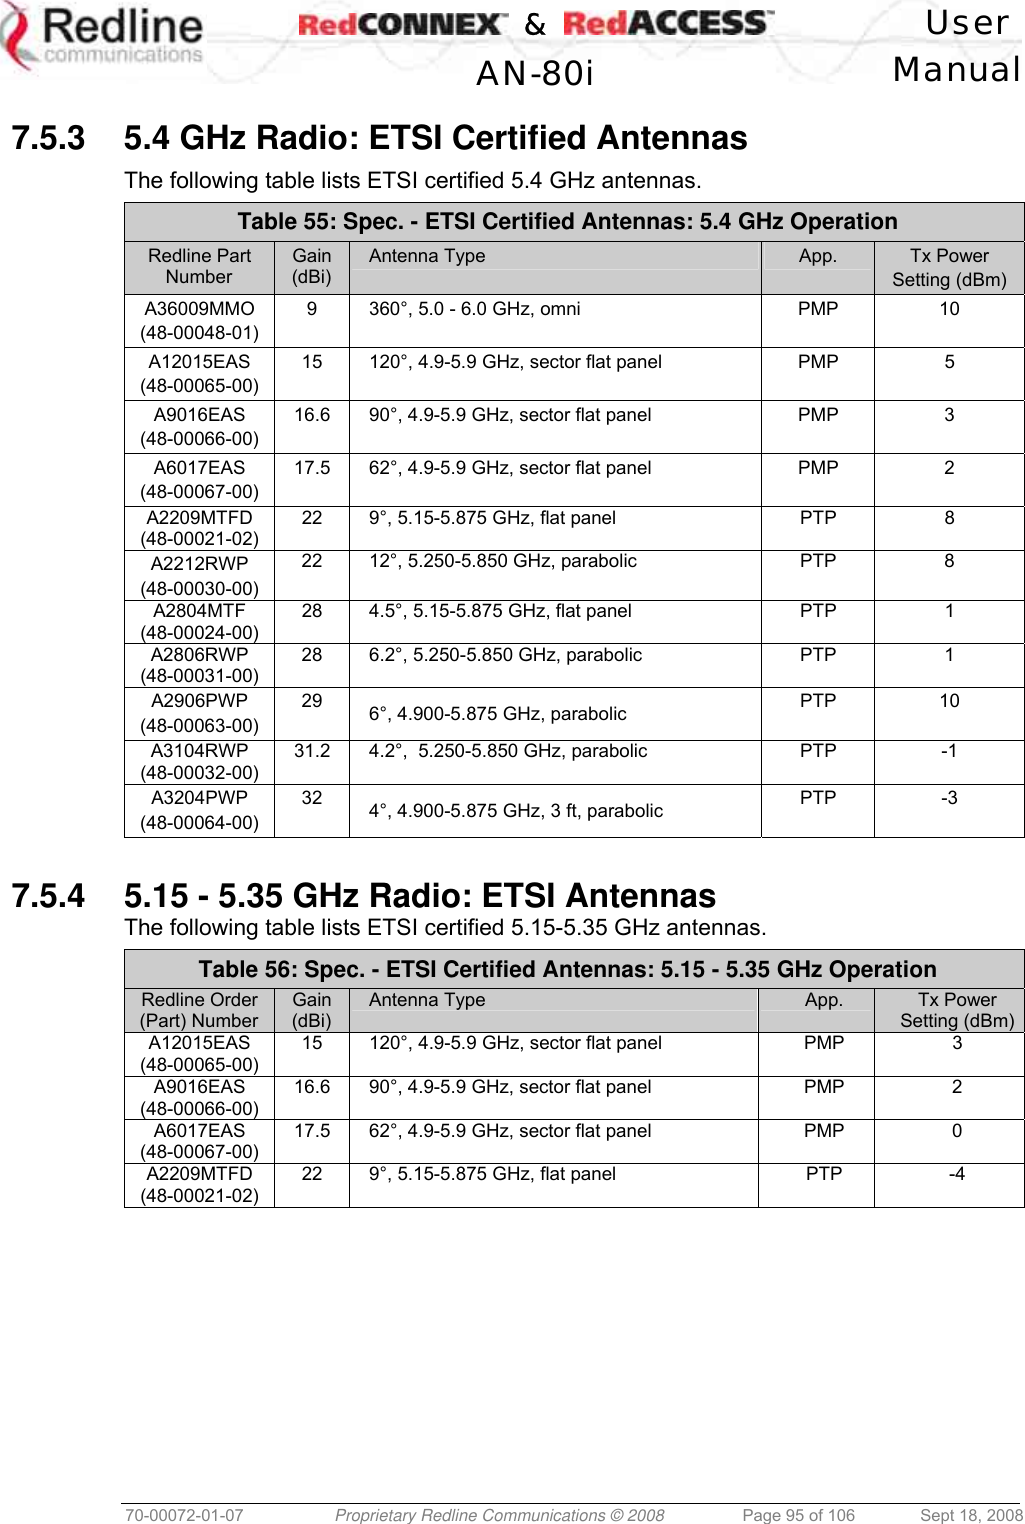    &amp;  User  AN-80i Manual  70-00072-01-07  Proprietary Redline Communications © 2008  Page 95 of 106  Sept 18, 2008  7.5.3  5.4 GHz Radio: ETSI Certified Antennas  The following table lists ETSI certified 5.4 GHz antennas. Table 55: Spec. - ETSI Certified Antennas: 5.4 GHz Operation Redline Part Number Gain (dBi) Antenna Type  App.  Tx Power Setting (dBm) A36009MMO  (48-00048-01) 9  360°, 5.0 - 6.0 GHz, omni  PMP  10 A12015EAS  (48-00065-00) 15  120°, 4.9-5.9 GHz, sector flat panel  PMP  5 A9016EAS (48-00066-00) 16.6  90°, 4.9-5.9 GHz, sector flat panel  PMP  3 A6017EAS (48-00067-00) 17.5  62°, 4.9-5.9 GHz, sector flat panel  PMP  2 A2209MTFD (48-00021-02) 22  9°, 5.15-5.875 GHz, flat panel  PTP  8 A2212RWP  (48-00030-00) 22  12°, 5.250-5.850 GHz, parabolic  PTP  8 A2804MTF (48-00024-00) 28  4.5°, 5.15-5.875 GHz, flat panel  PTP  1 A2806RWP  (48-00031-00) 28  6.2°, 5.250-5.850 GHz, parabolic  PTP  1 A2906PWP  (48-00063-00) 29  6°, 4.900-5.875 GHz, parabolic  PTP 10 A3104RWP  (48-00032-00) 31.2  4.2°,  5.250-5.850 GHz, parabolic  PTP  -1 A3204PWP (48-00064-00) 32  4°, 4.900-5.875 GHz, 3 ft, parabolic  PTP -3  7.5.4  5.15 - 5.35 GHz Radio: ETSI Antennas The following table lists ETSI certified 5.15-5.35 GHz antennas. Table 56: Spec. - ETSI Certified Antennas: 5.15 - 5.35 GHz Operation Redline Order (Part) Number Gain (dBi) Antenna Type  App.  Tx Power Setting (dBm)A12015EAS  (48-00065-00) 15  120°, 4.9-5.9 GHz, sector flat panel  PMP  3 A9016EAS (48-00066-00) 16.6  90°, 4.9-5.9 GHz, sector flat panel  PMP  2 A6017EAS (48-00067-00) 17.5  62°, 4.9-5.9 GHz, sector flat panel  PMP  0 A2209MTFD (48-00021-02) 22  9°, 5.15-5.875 GHz, flat panel  PTP  -4  